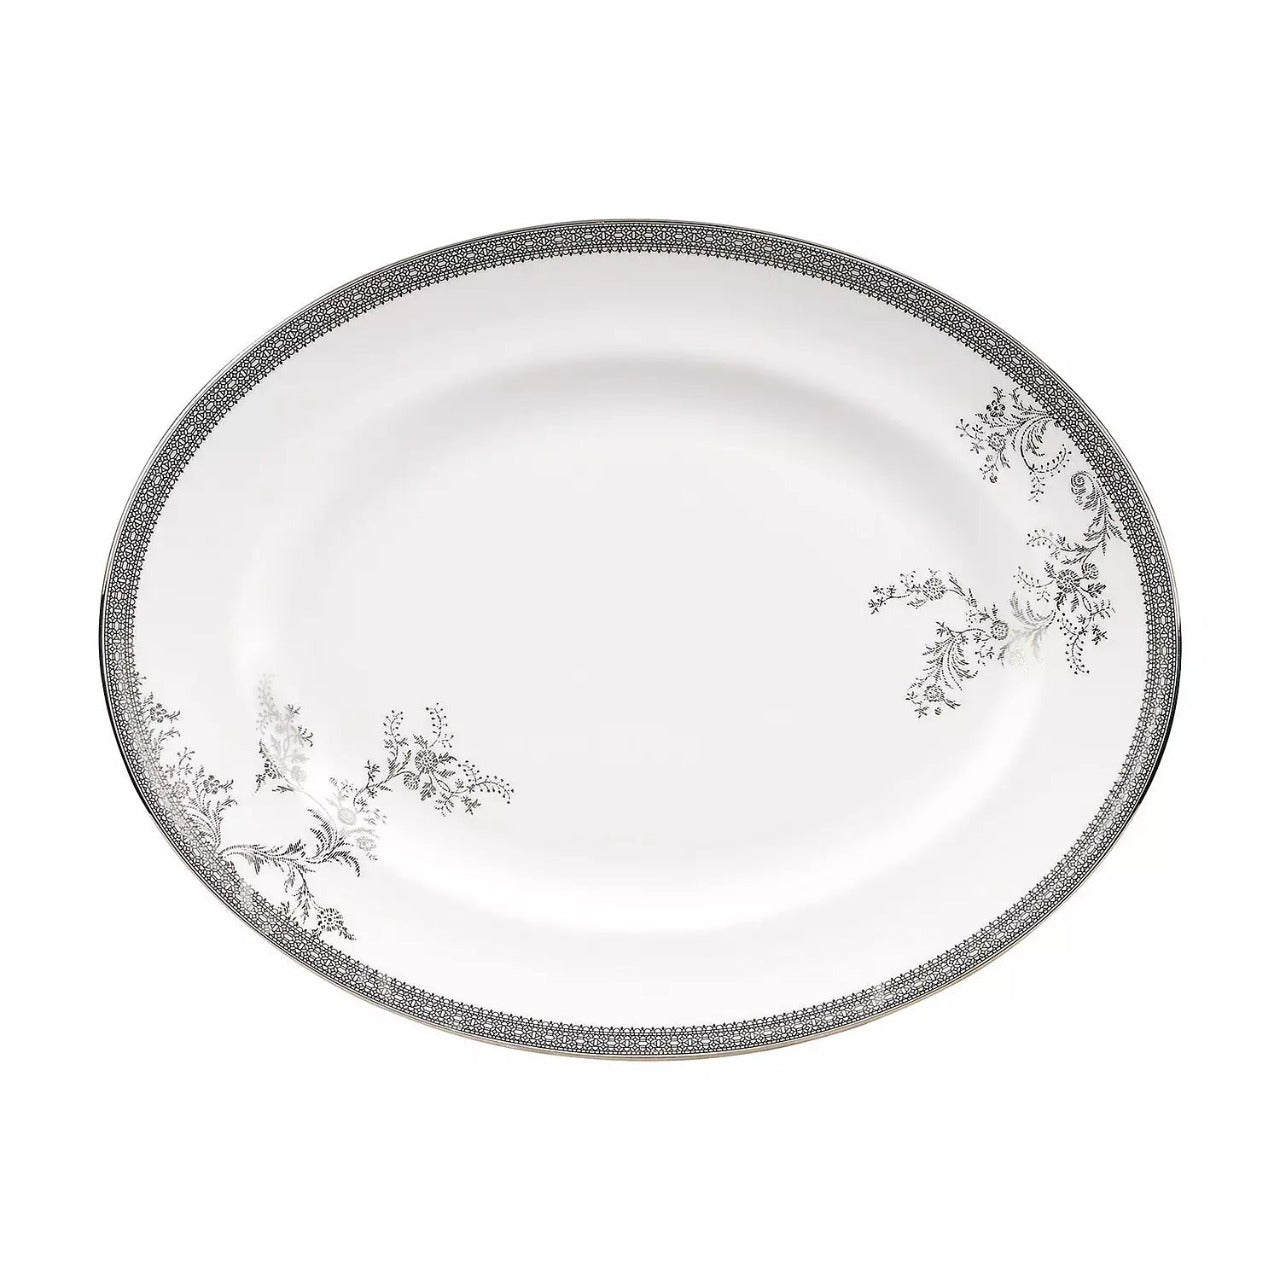 Wedgwood Vera Wang Lace Platinum Oval Dish 35 cm  Inspired by the brightly hued corsages from renowned New York designer Vera Wang's bridal collection, the Lace Collection is characterized by understated elegance. 